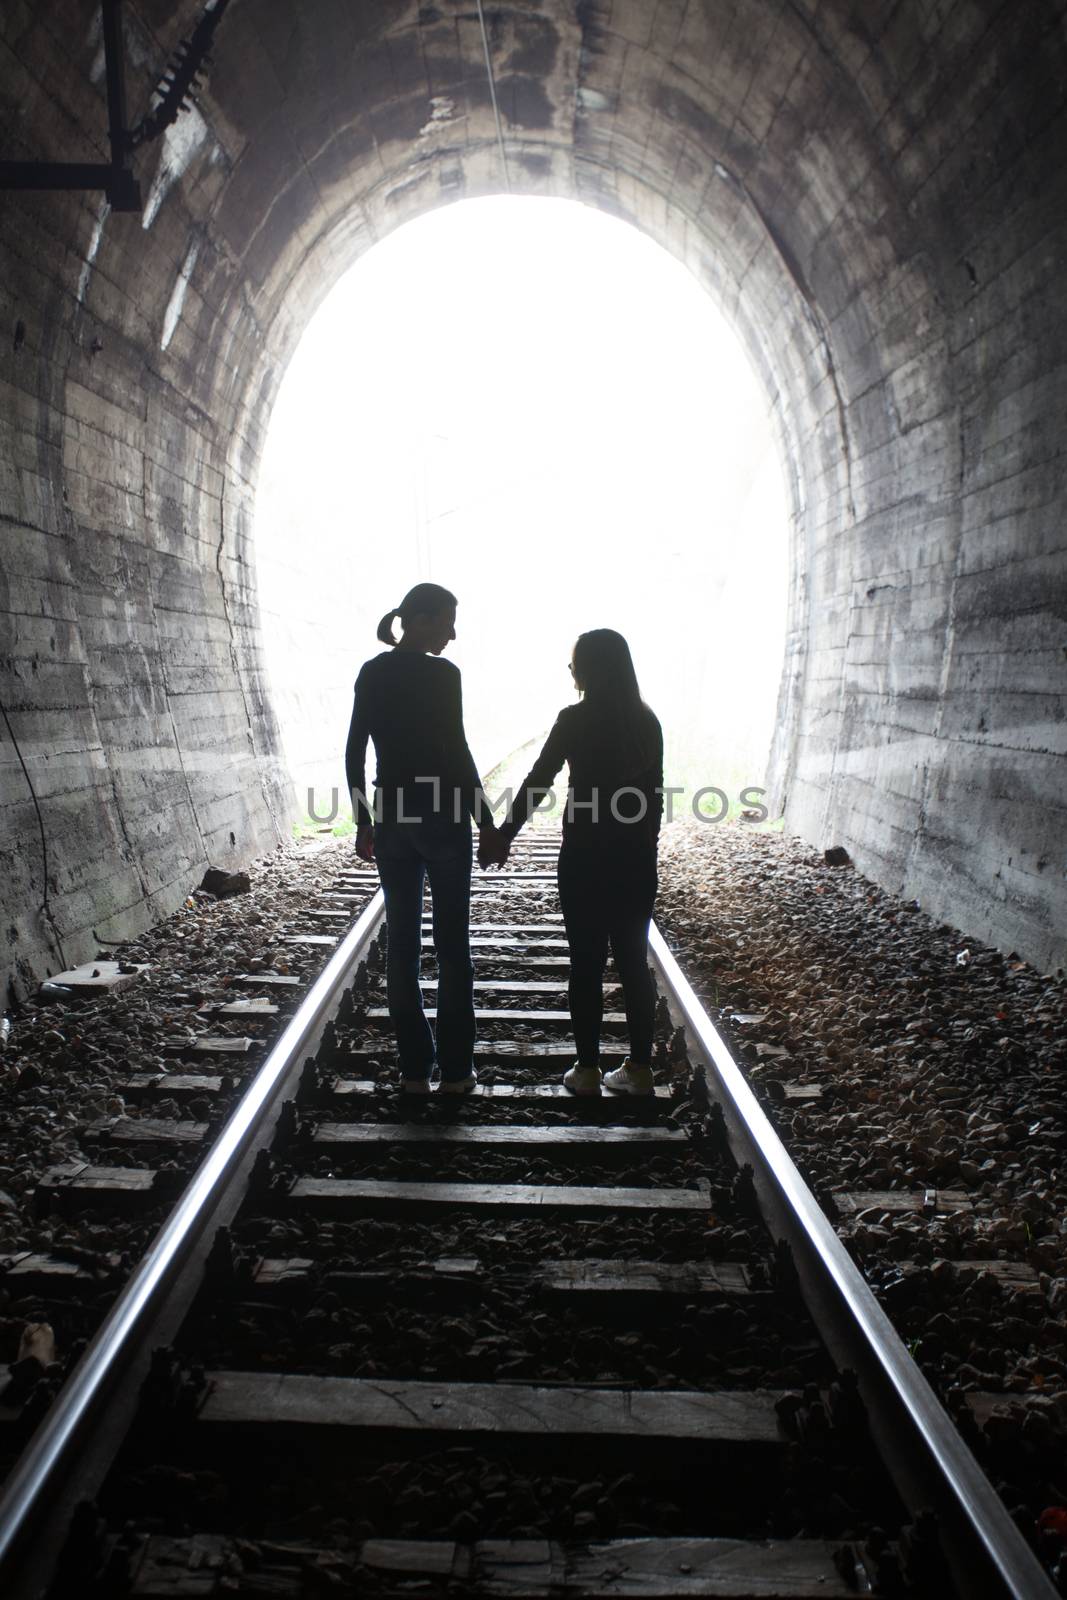 Couple walking together through a railway tunnel by adamr